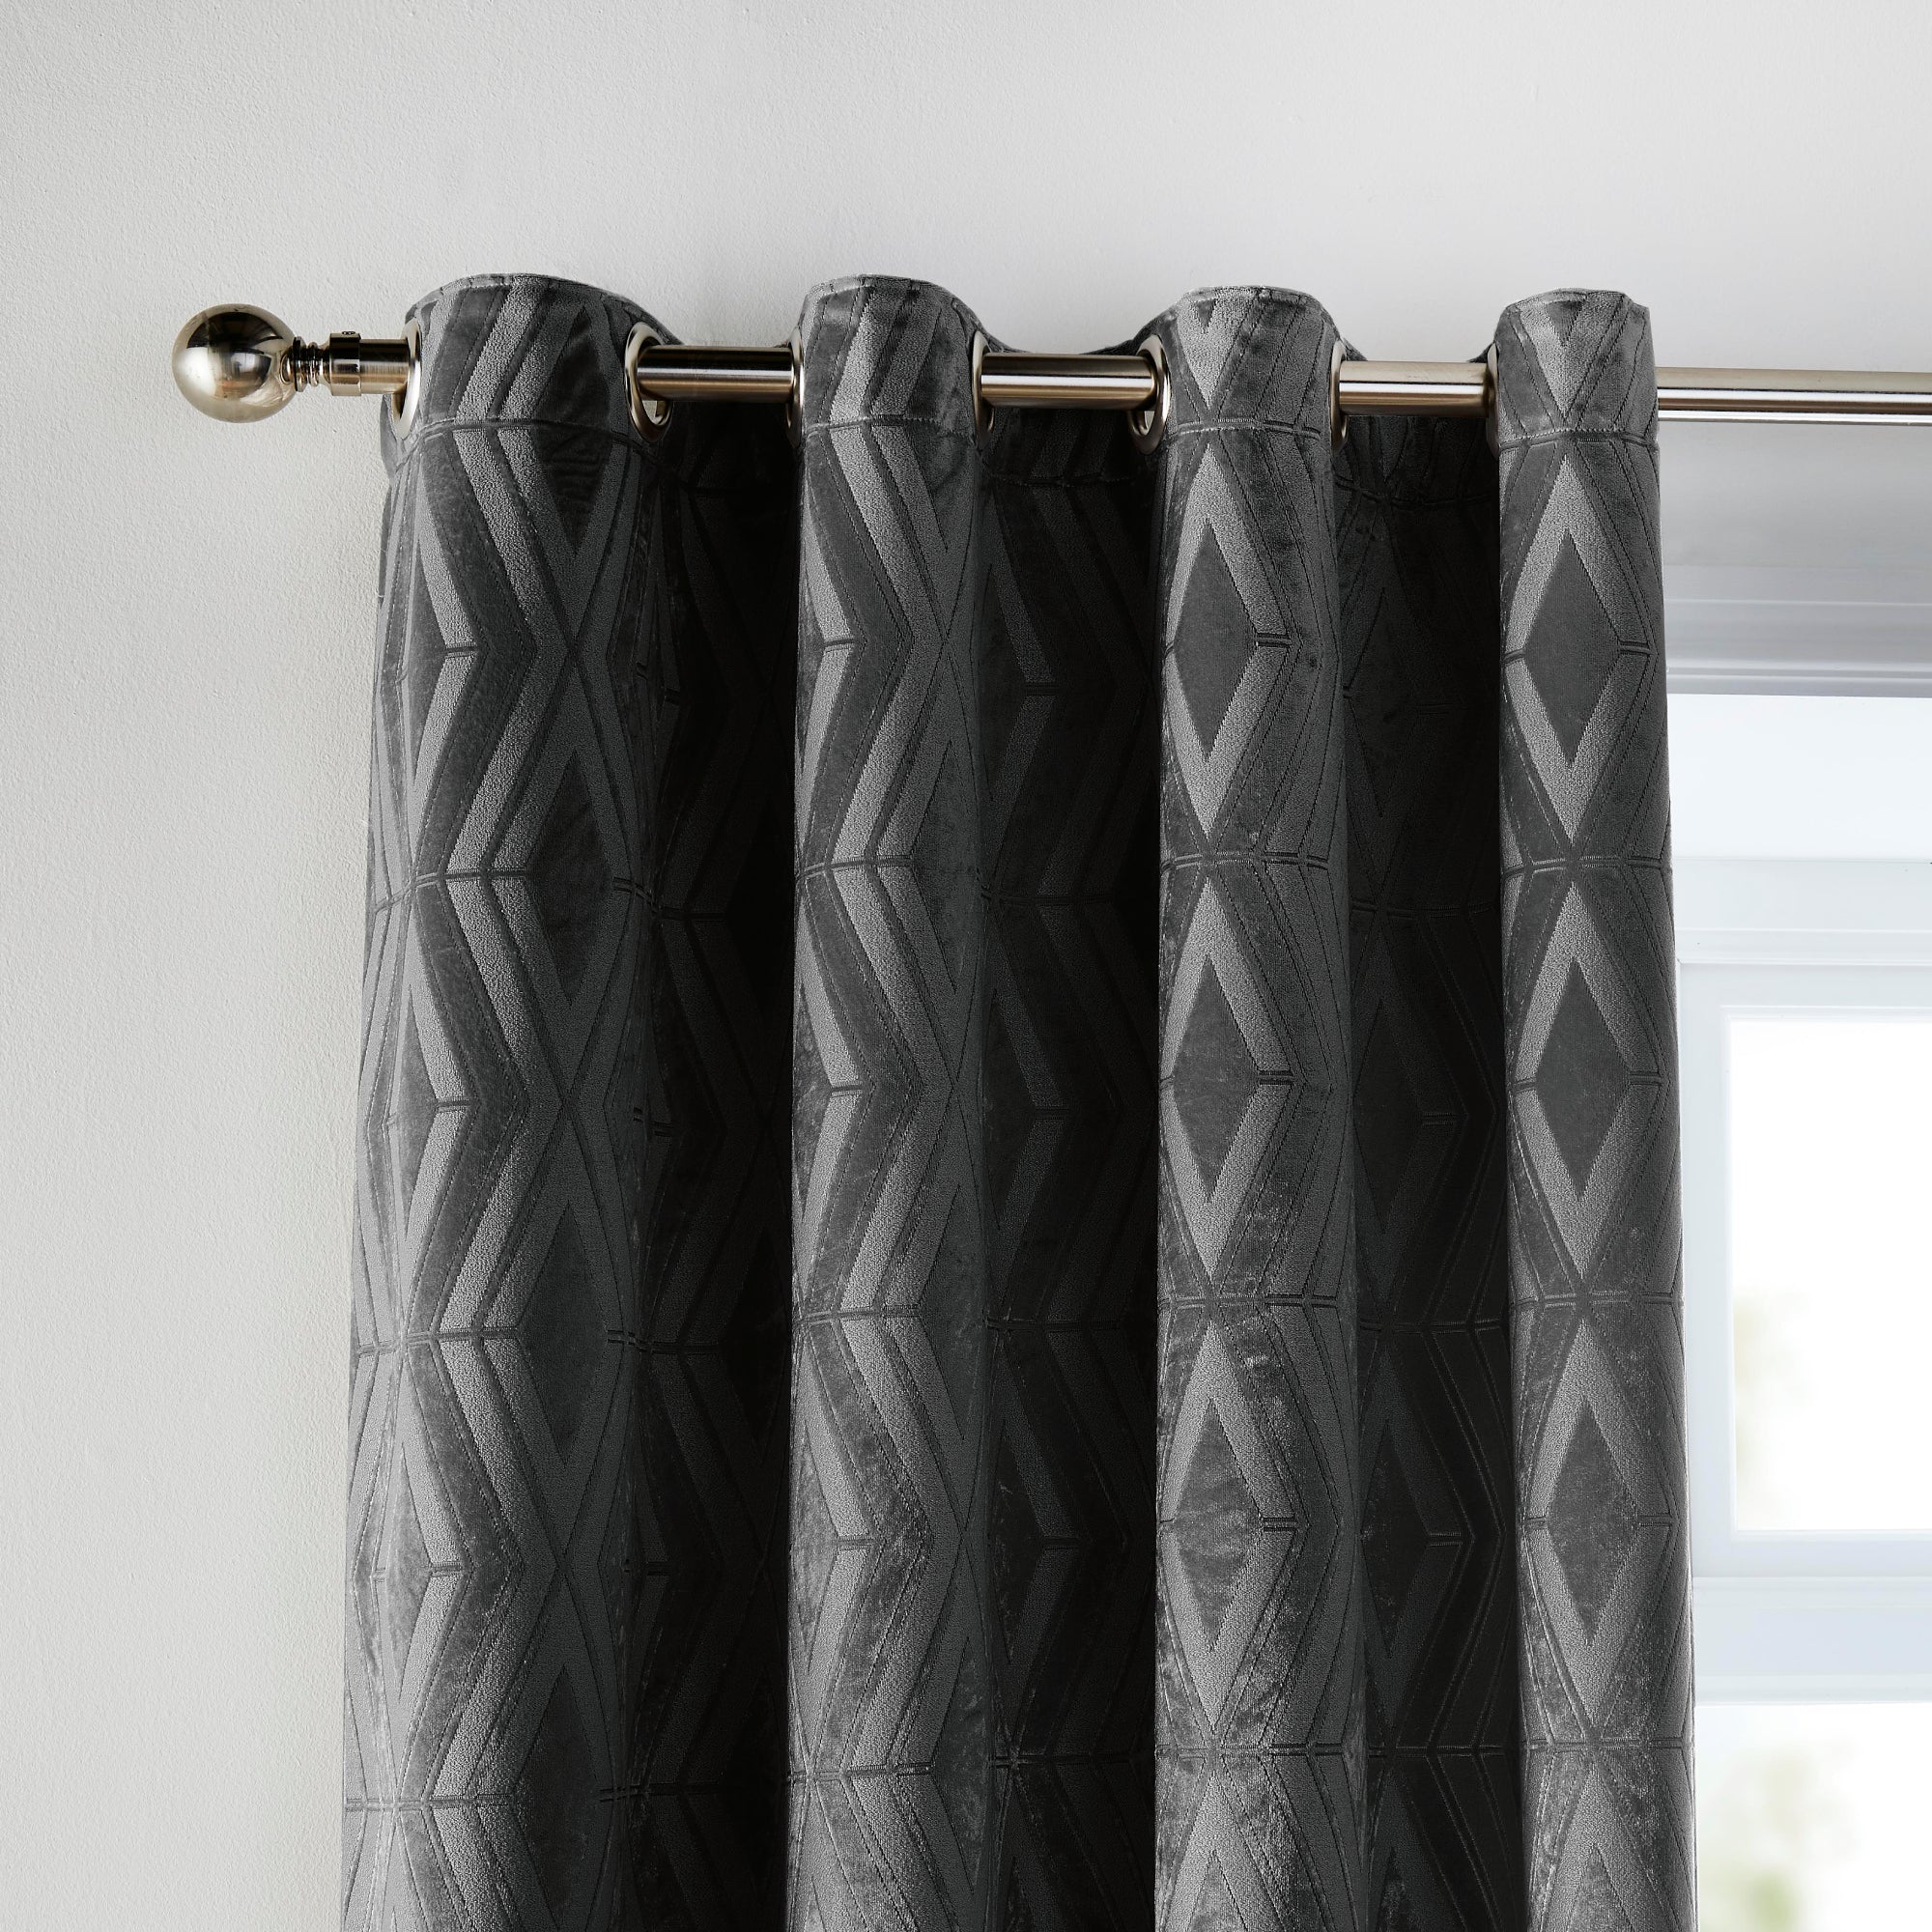 Pair of Eyelet Curtains Marco by Curtina in Slate